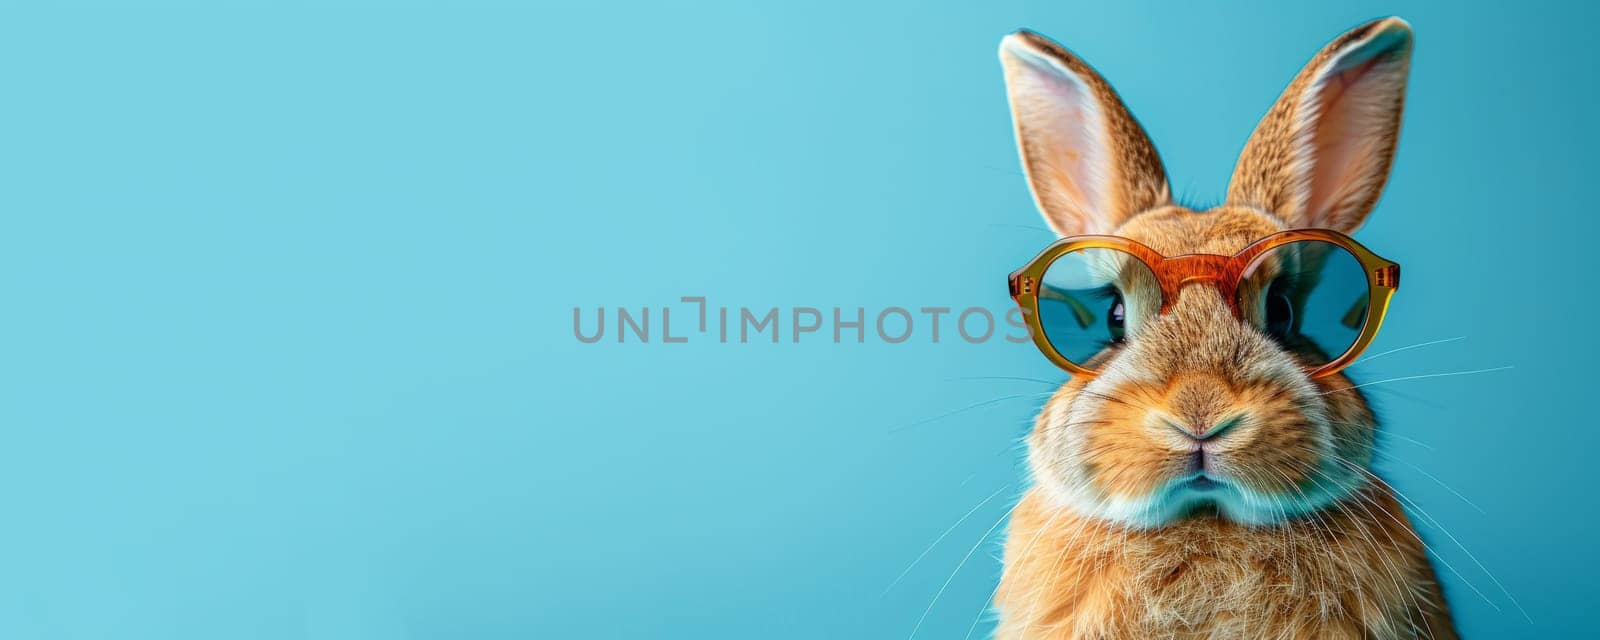 Funny rabbit wearing sunglasses on blue background, whimsical animal portrait. Easter concept.